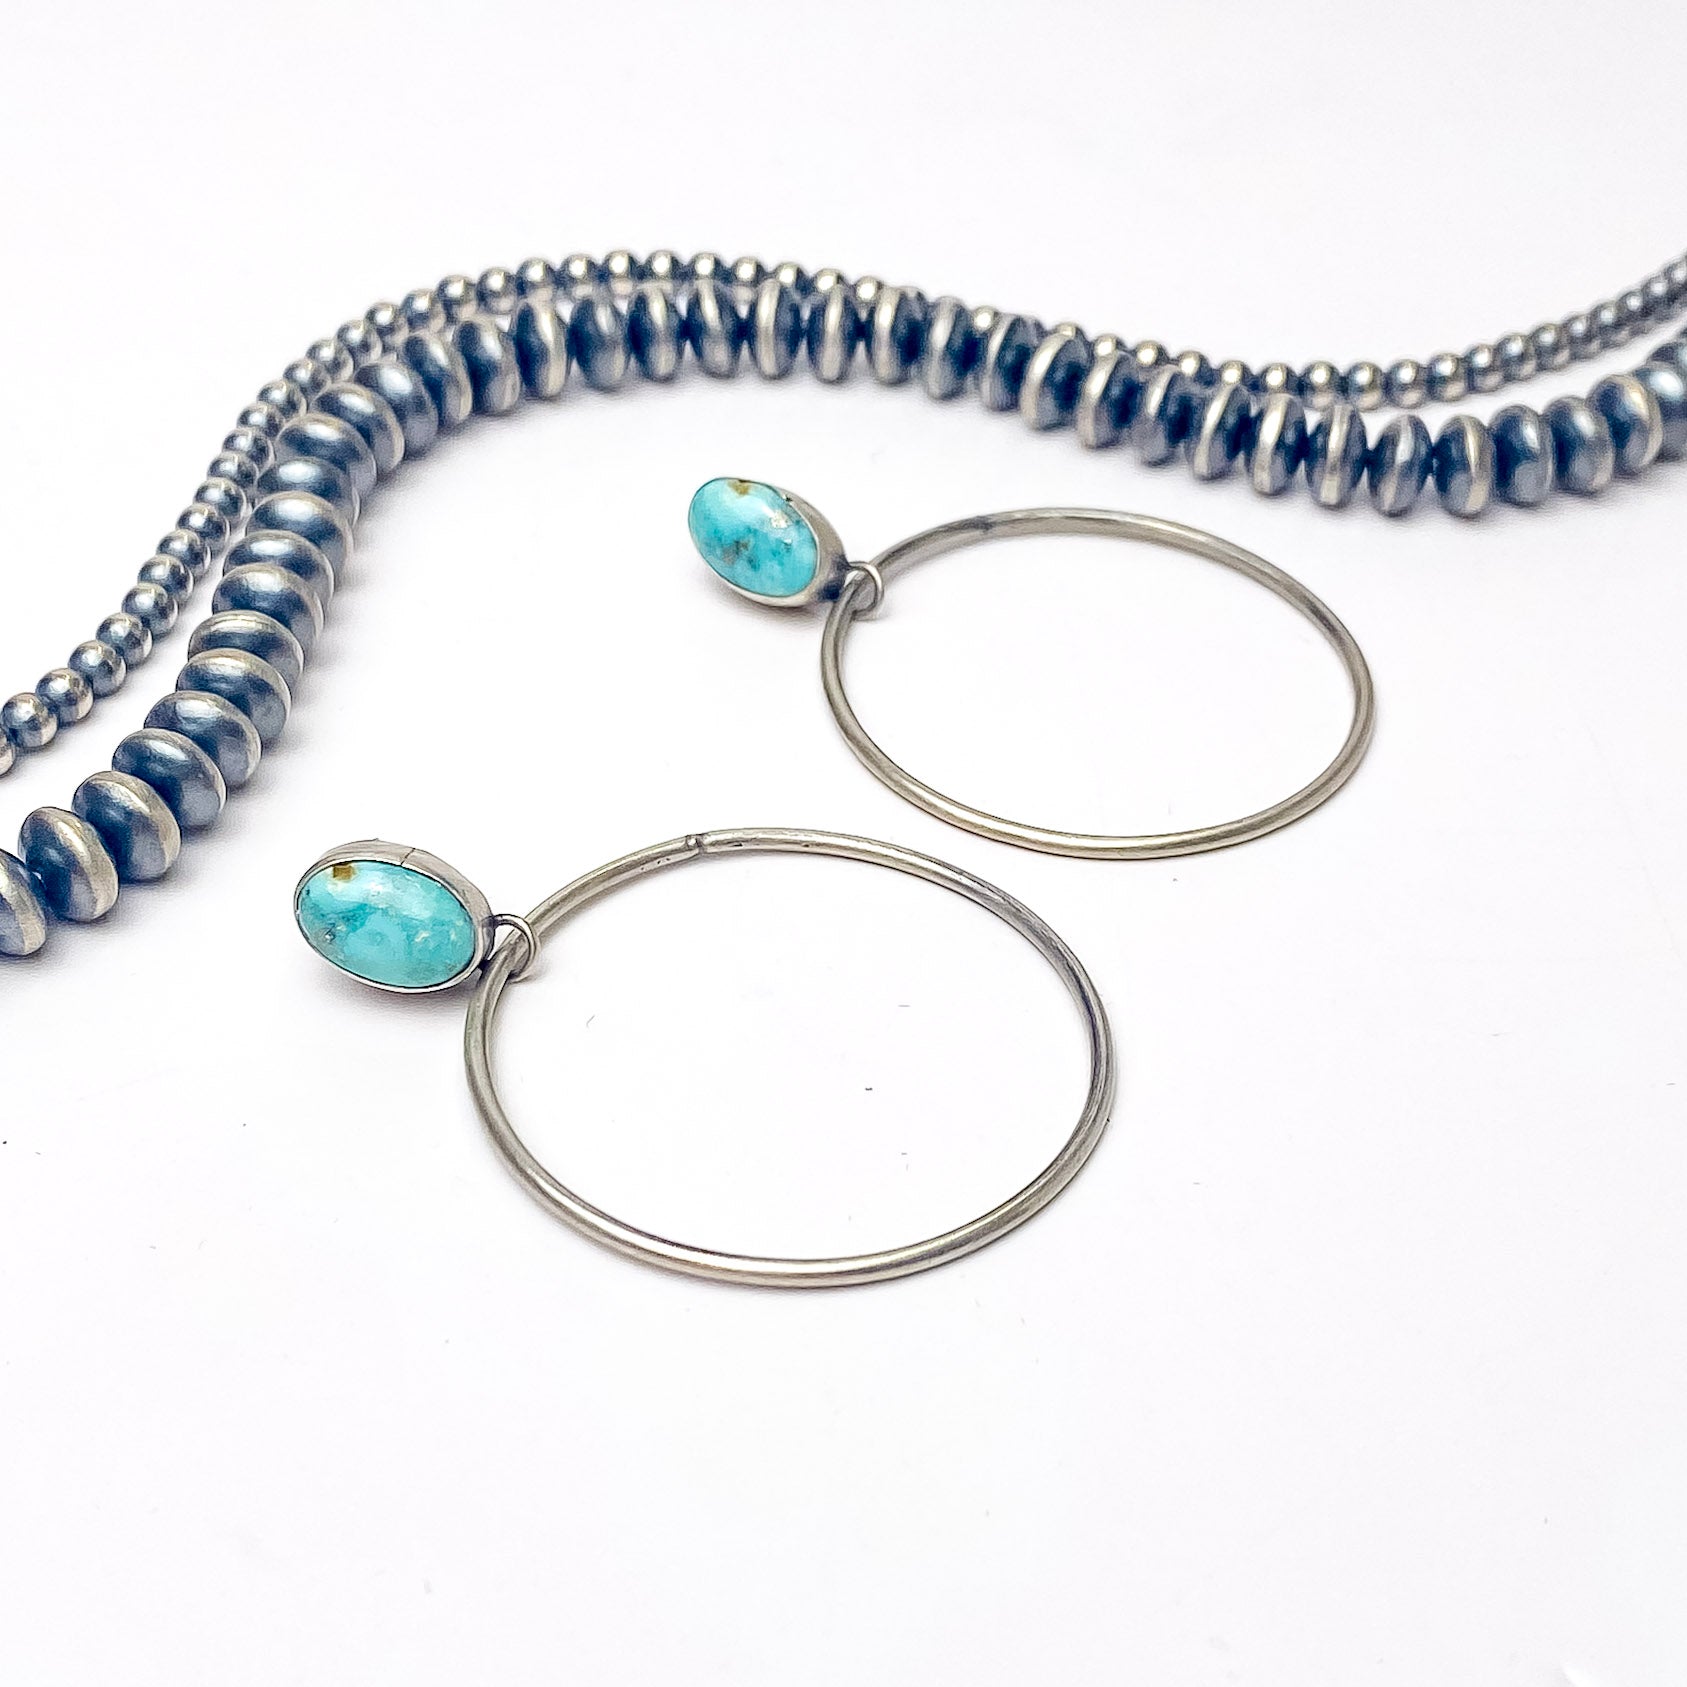 In the picture are handmade stud turquoise hoop earrings with a white background